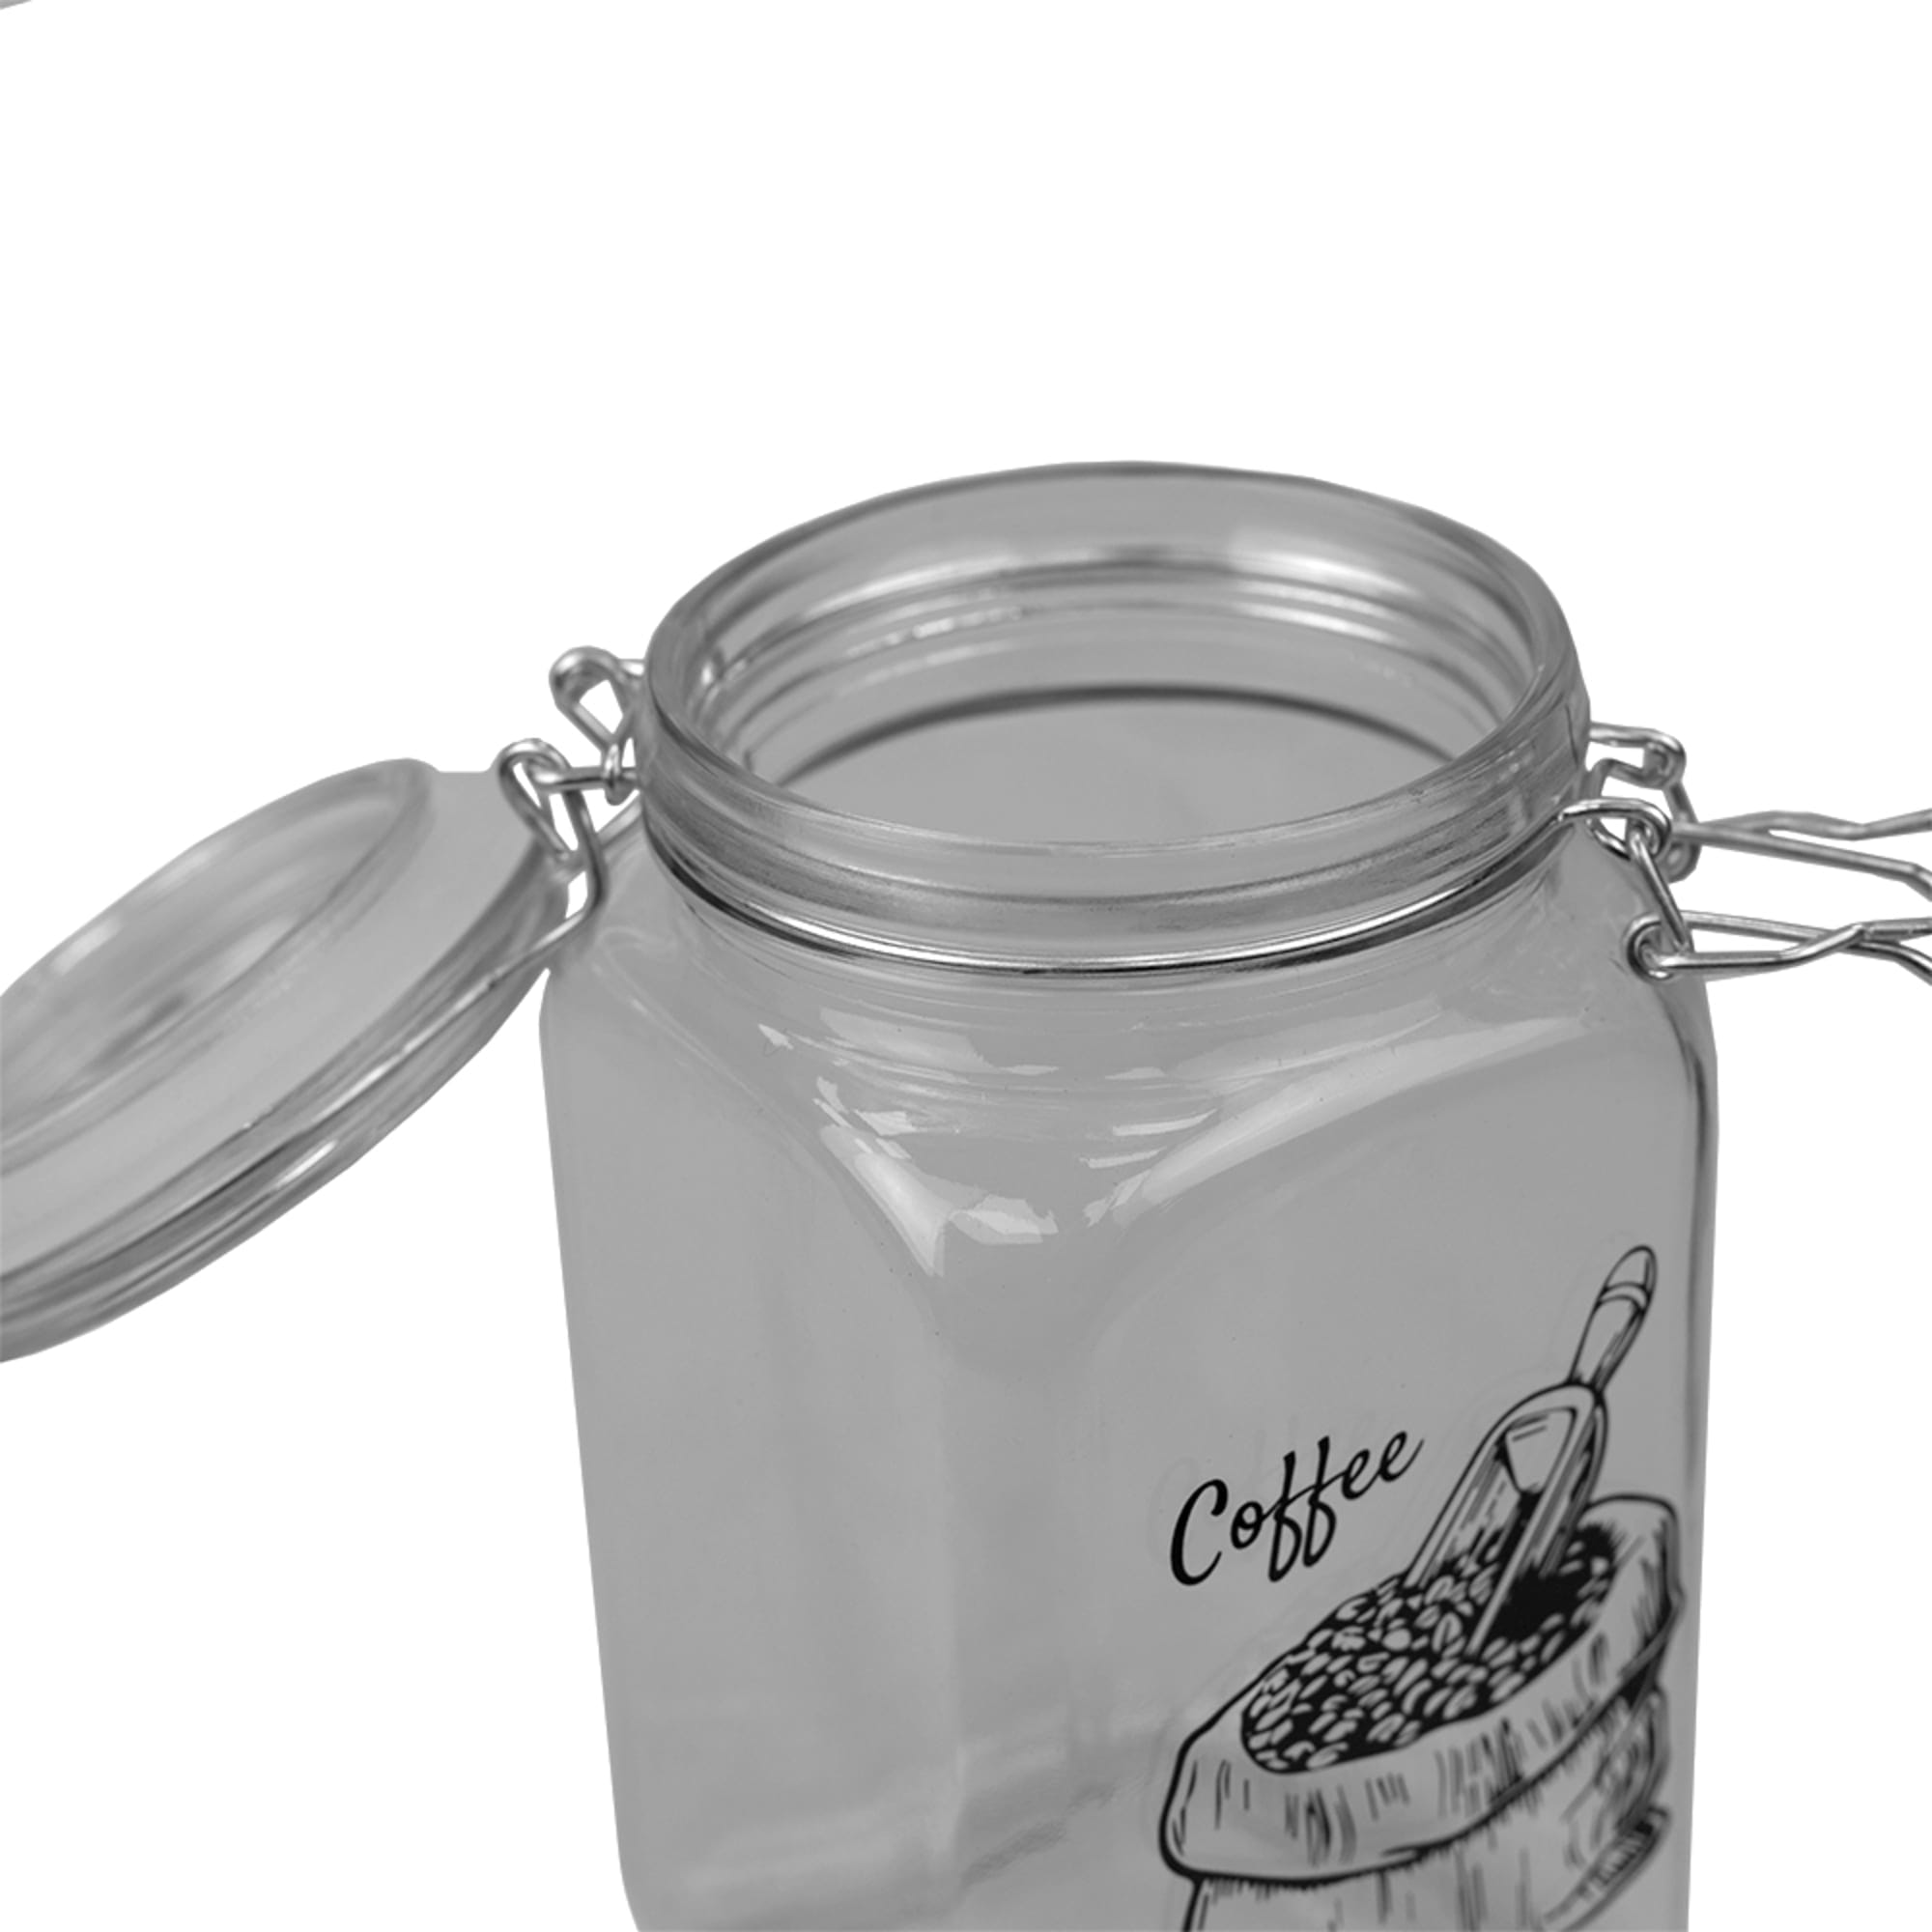 Home Basics Ludlow 43 oz. Glass Canister with Metal Clasp, Clear $5.00 EACH, CASE PACK OF 12